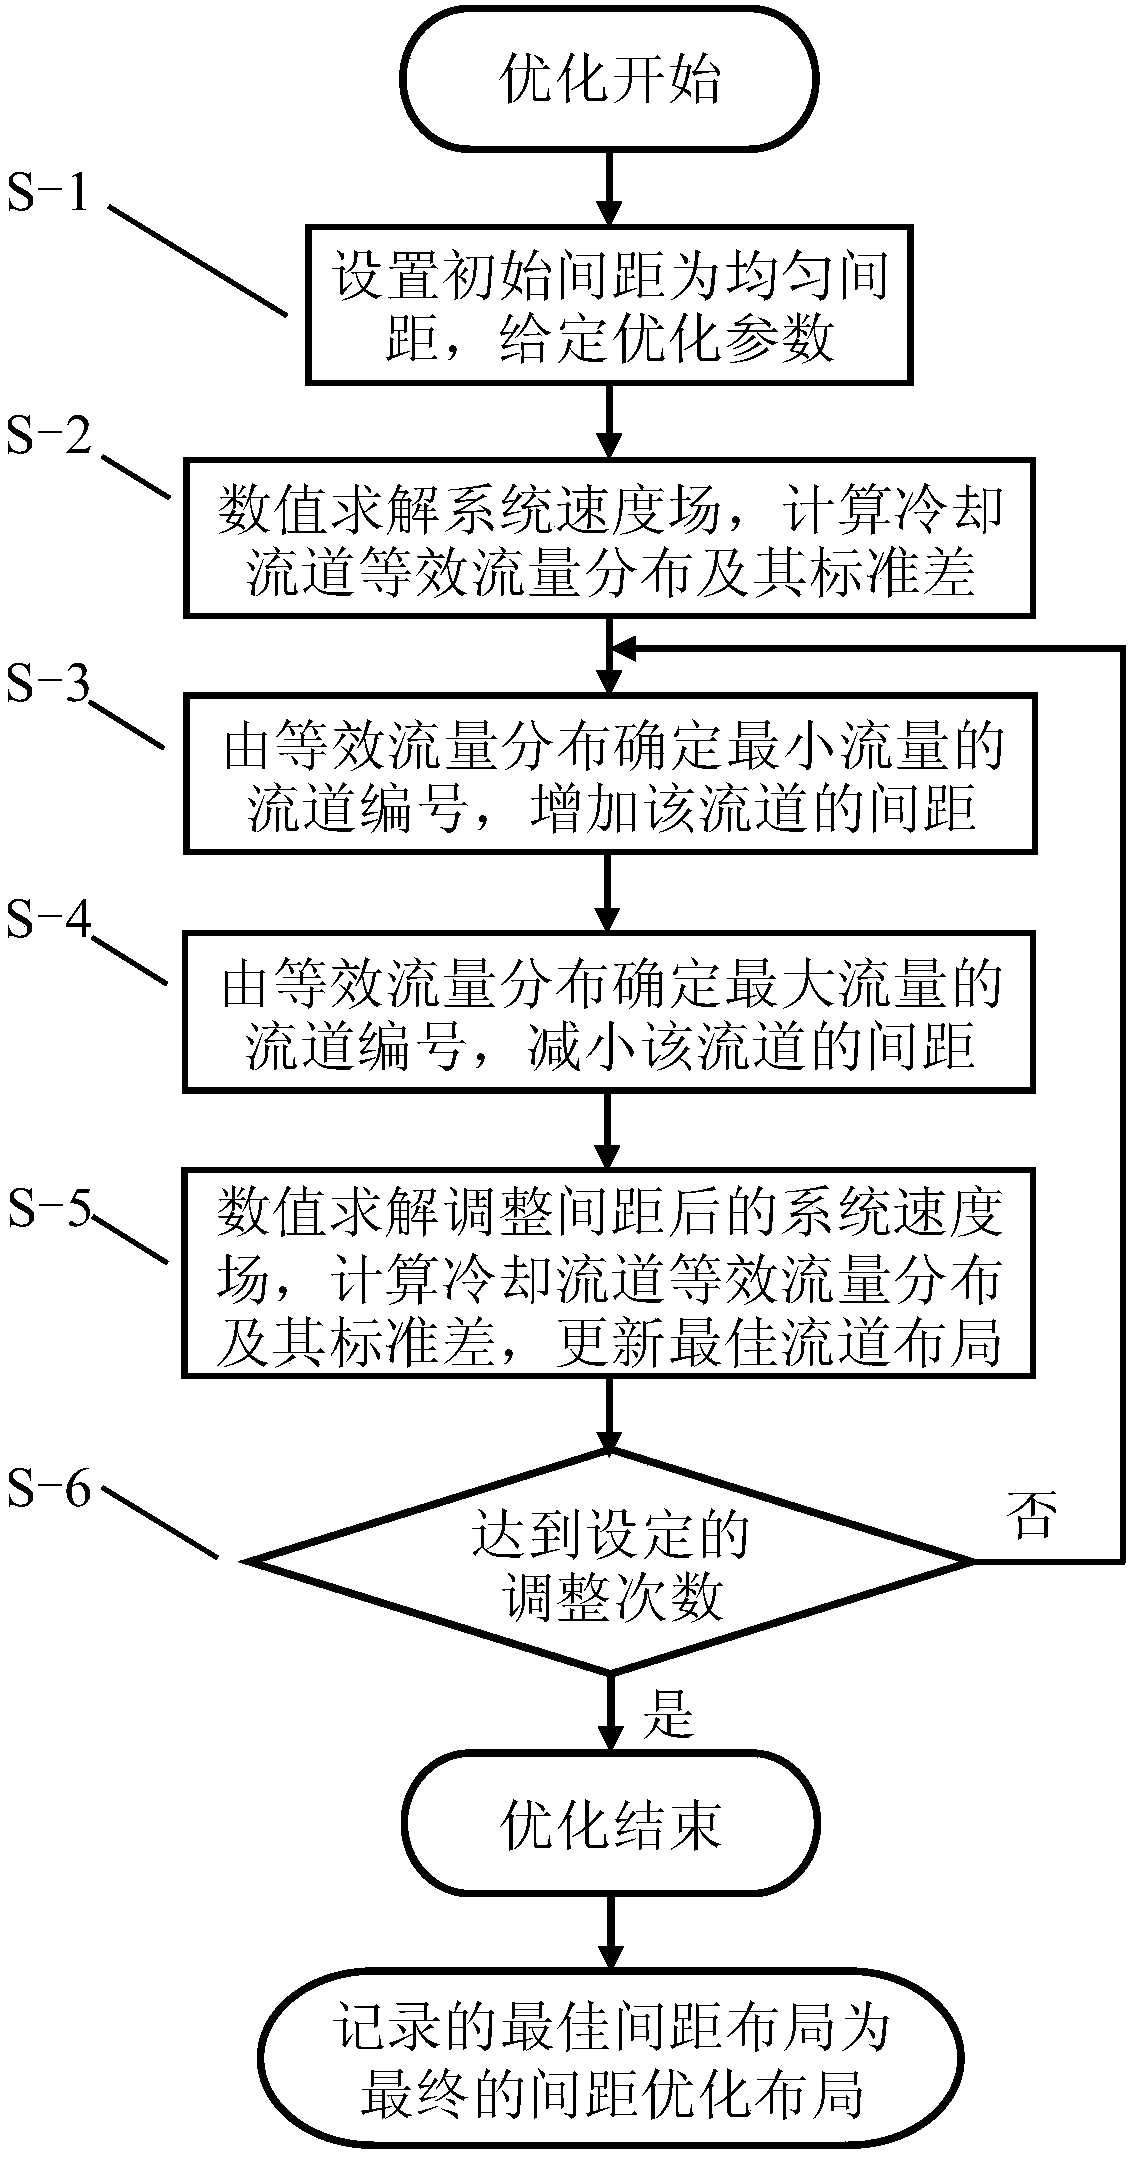 Rapid optimization method for power battery air cooling system runner interval